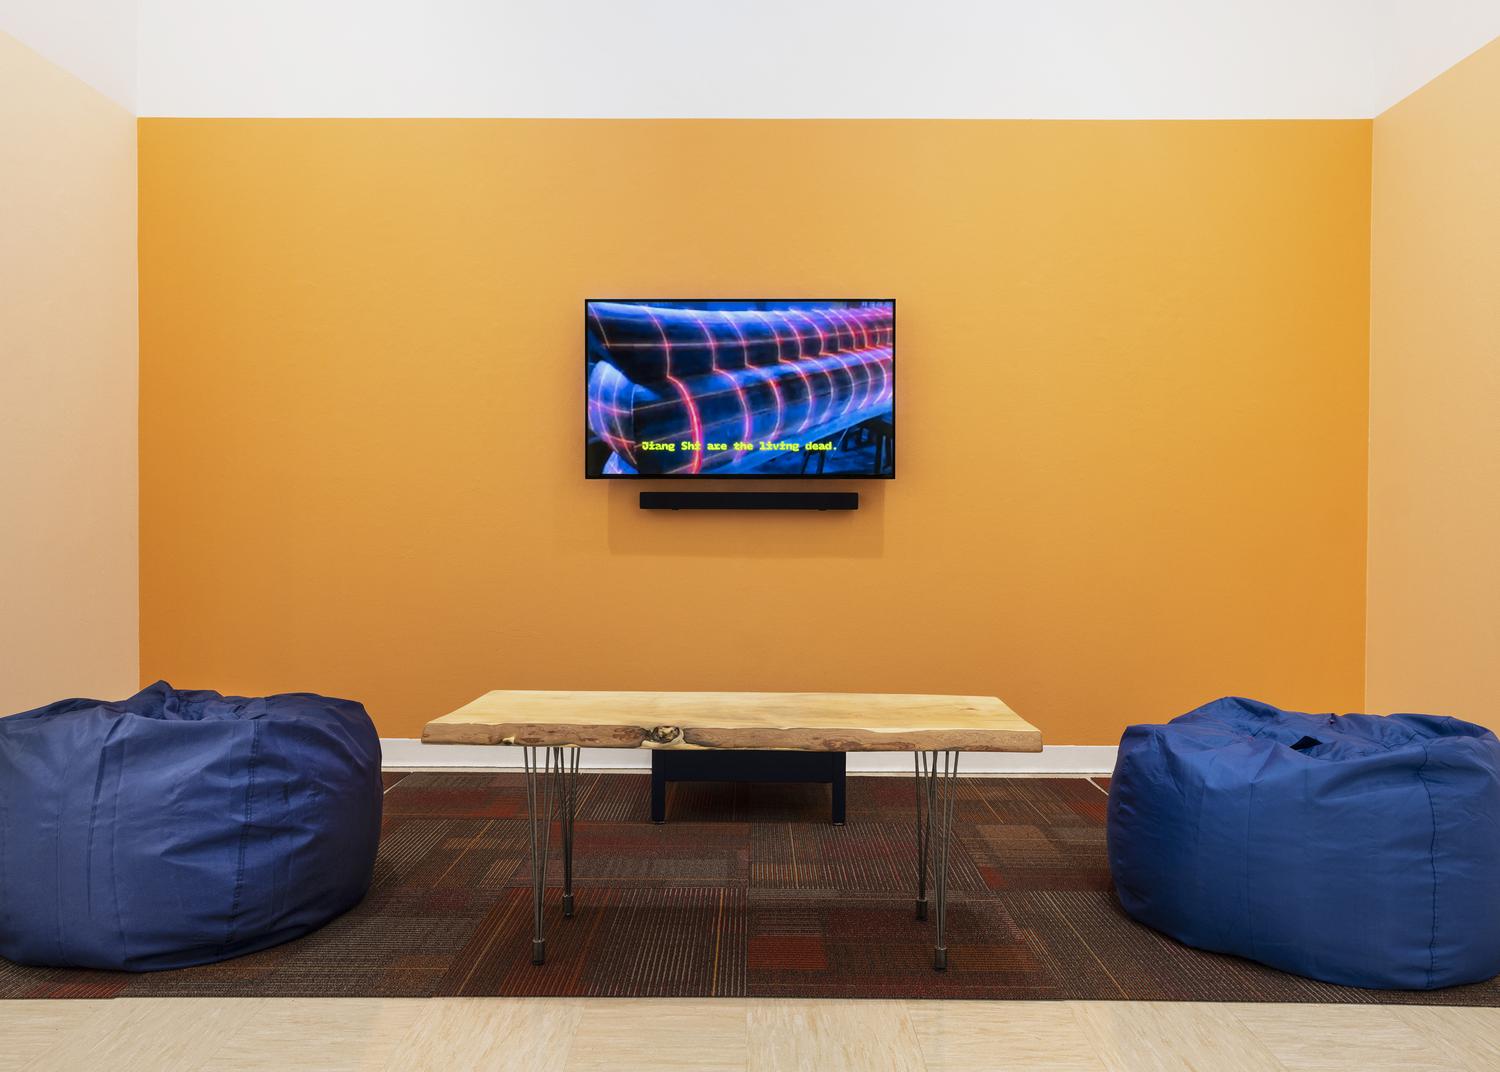 A TV is mounted on a yellow wall showing an ambiguous image of blue and pink shapes with subtitles that read “Jiang Chi are the living dead.” In front of the TV is a wooden table with a live edge finish, flanked on each side by two oversized blue bean bag chairs.